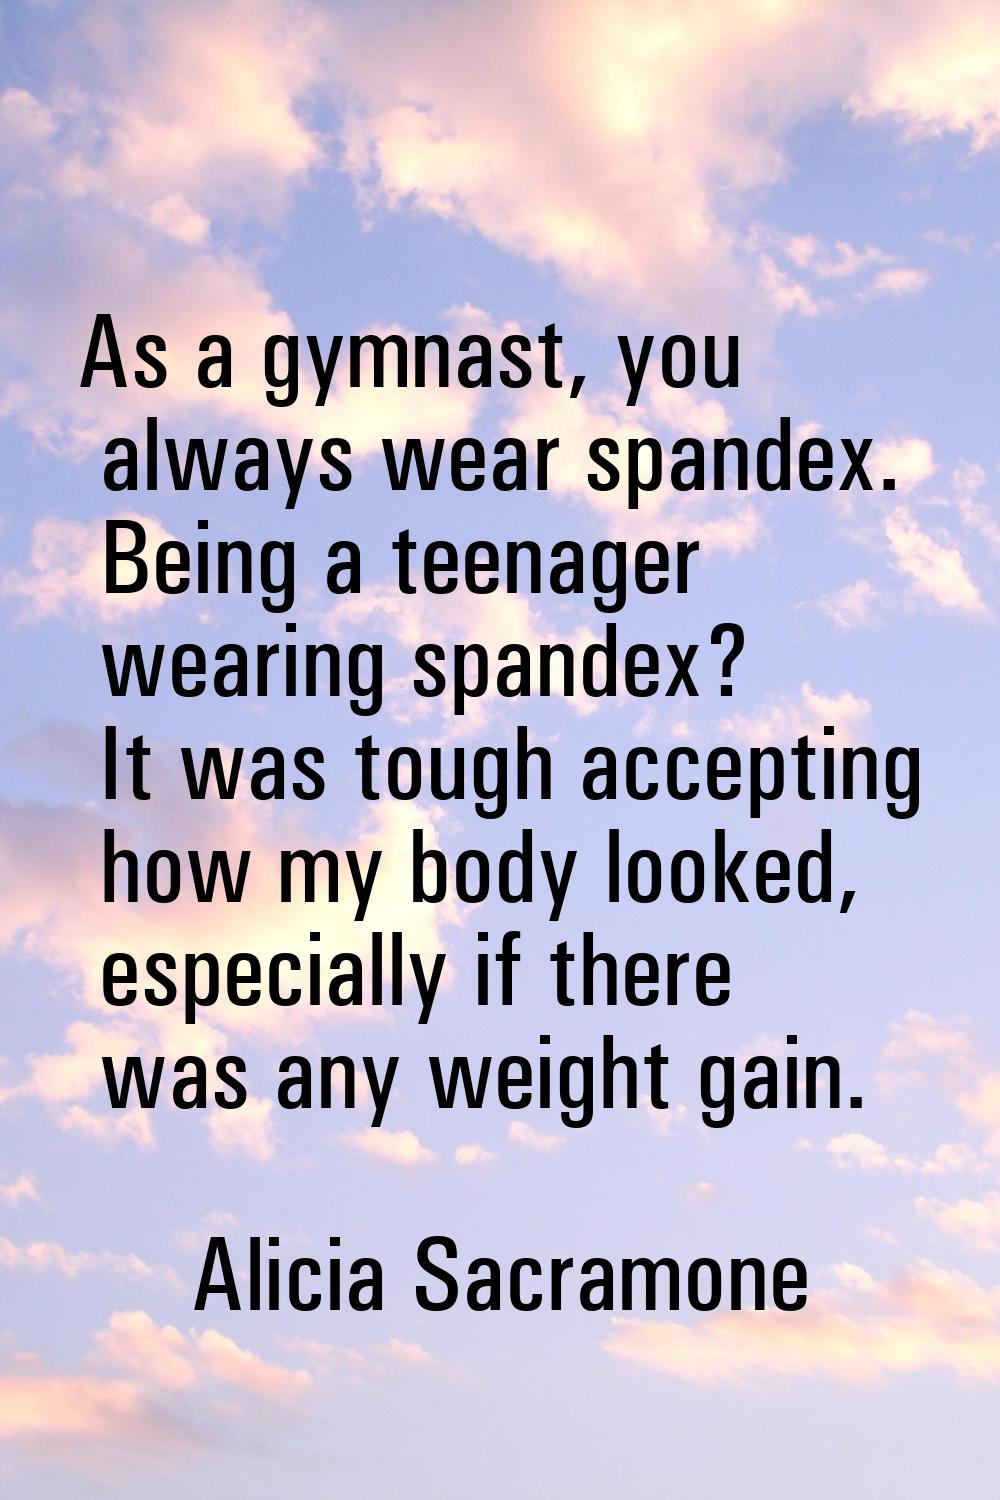 As a gymnast, you always wear spandex. Being a teenager wearing spandex? It was tough accepting how